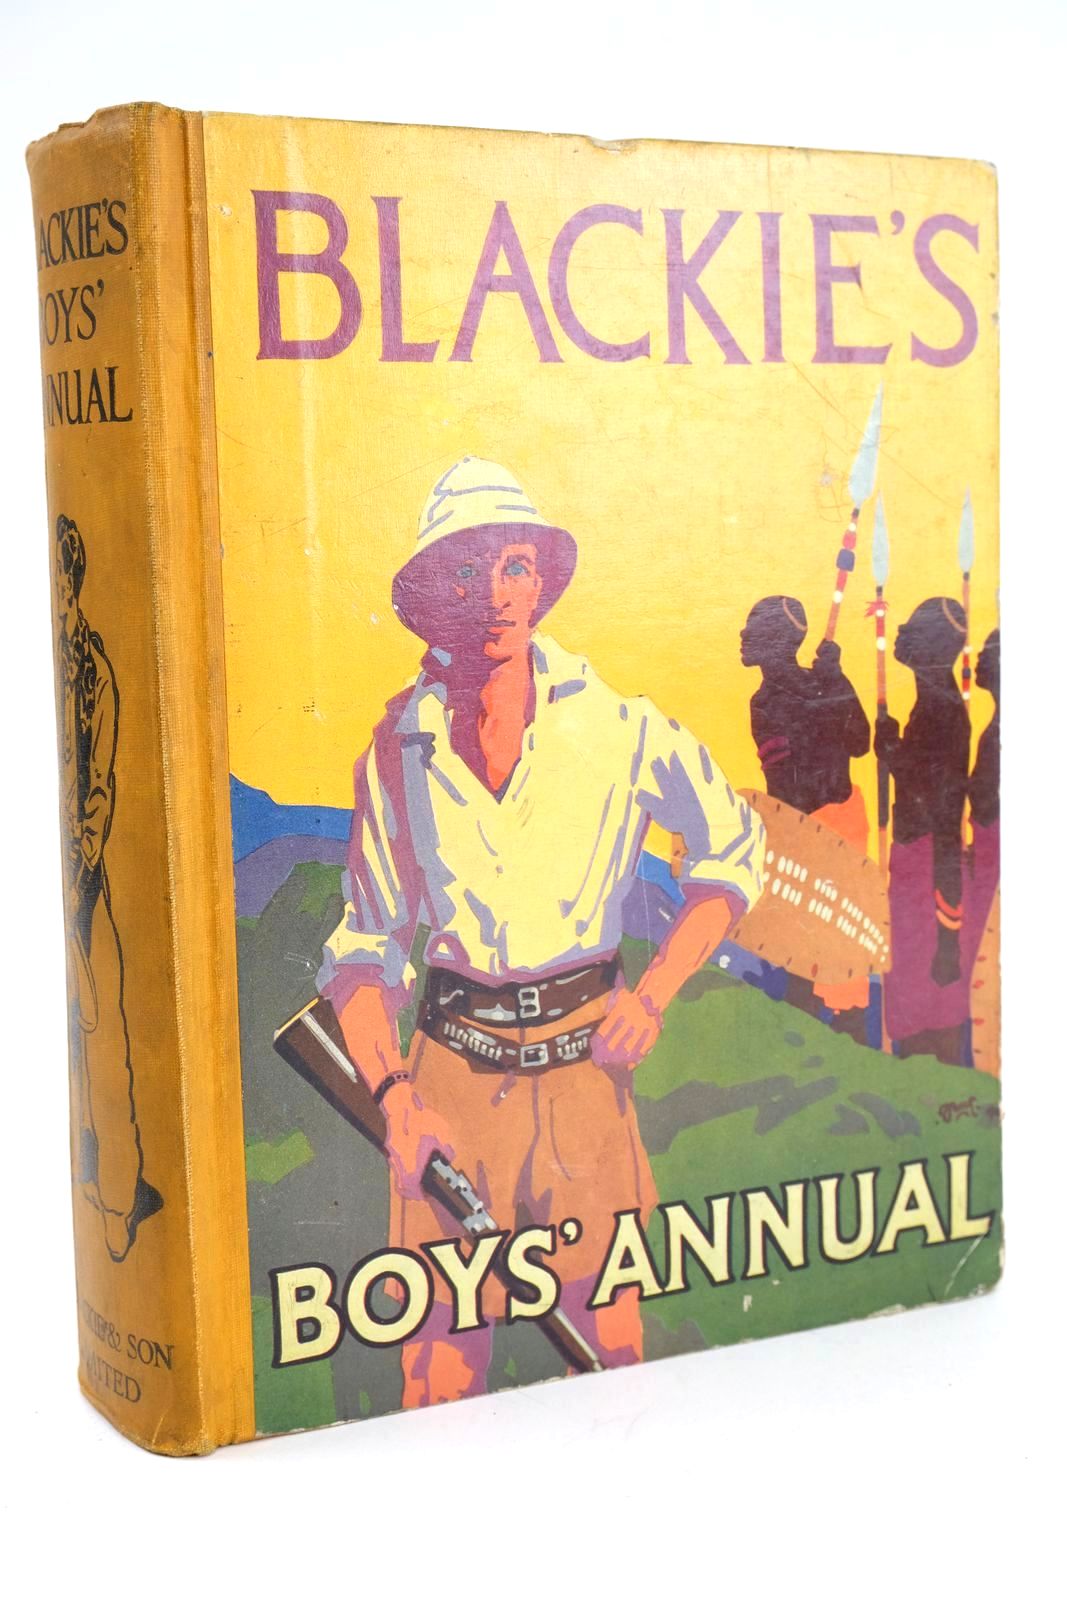 Photo of BLACKIE'S BOYS' ANNUAL written by Bird, Richard Westerman, Percy F. Cowper, E.E. et al, illustrated by Henry, Thomas Hilder, Rowland Wigfull, W. Edward Rountree, Harry et al., published by Blackie &amp; Son Ltd. (STOCK CODE: 1324776)  for sale by Stella & Rose's Books